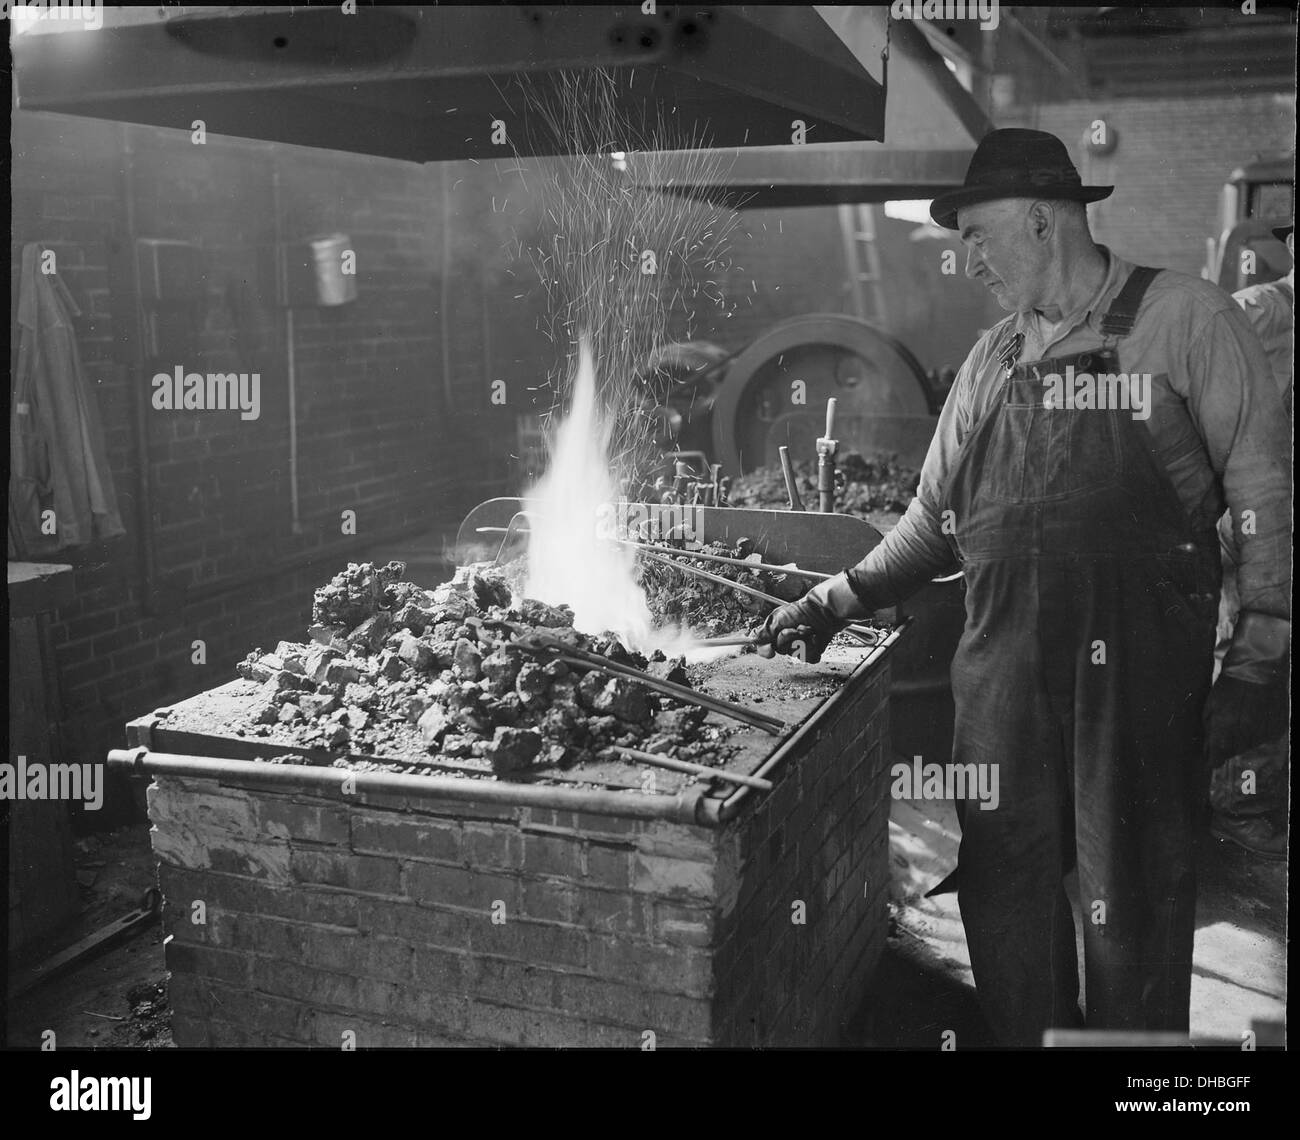 Blacksmith and his forge. The Pocahontas Corporation, Mines 33-34, Bishop, Tazewell County, Virginia. 541077 Stock Photo